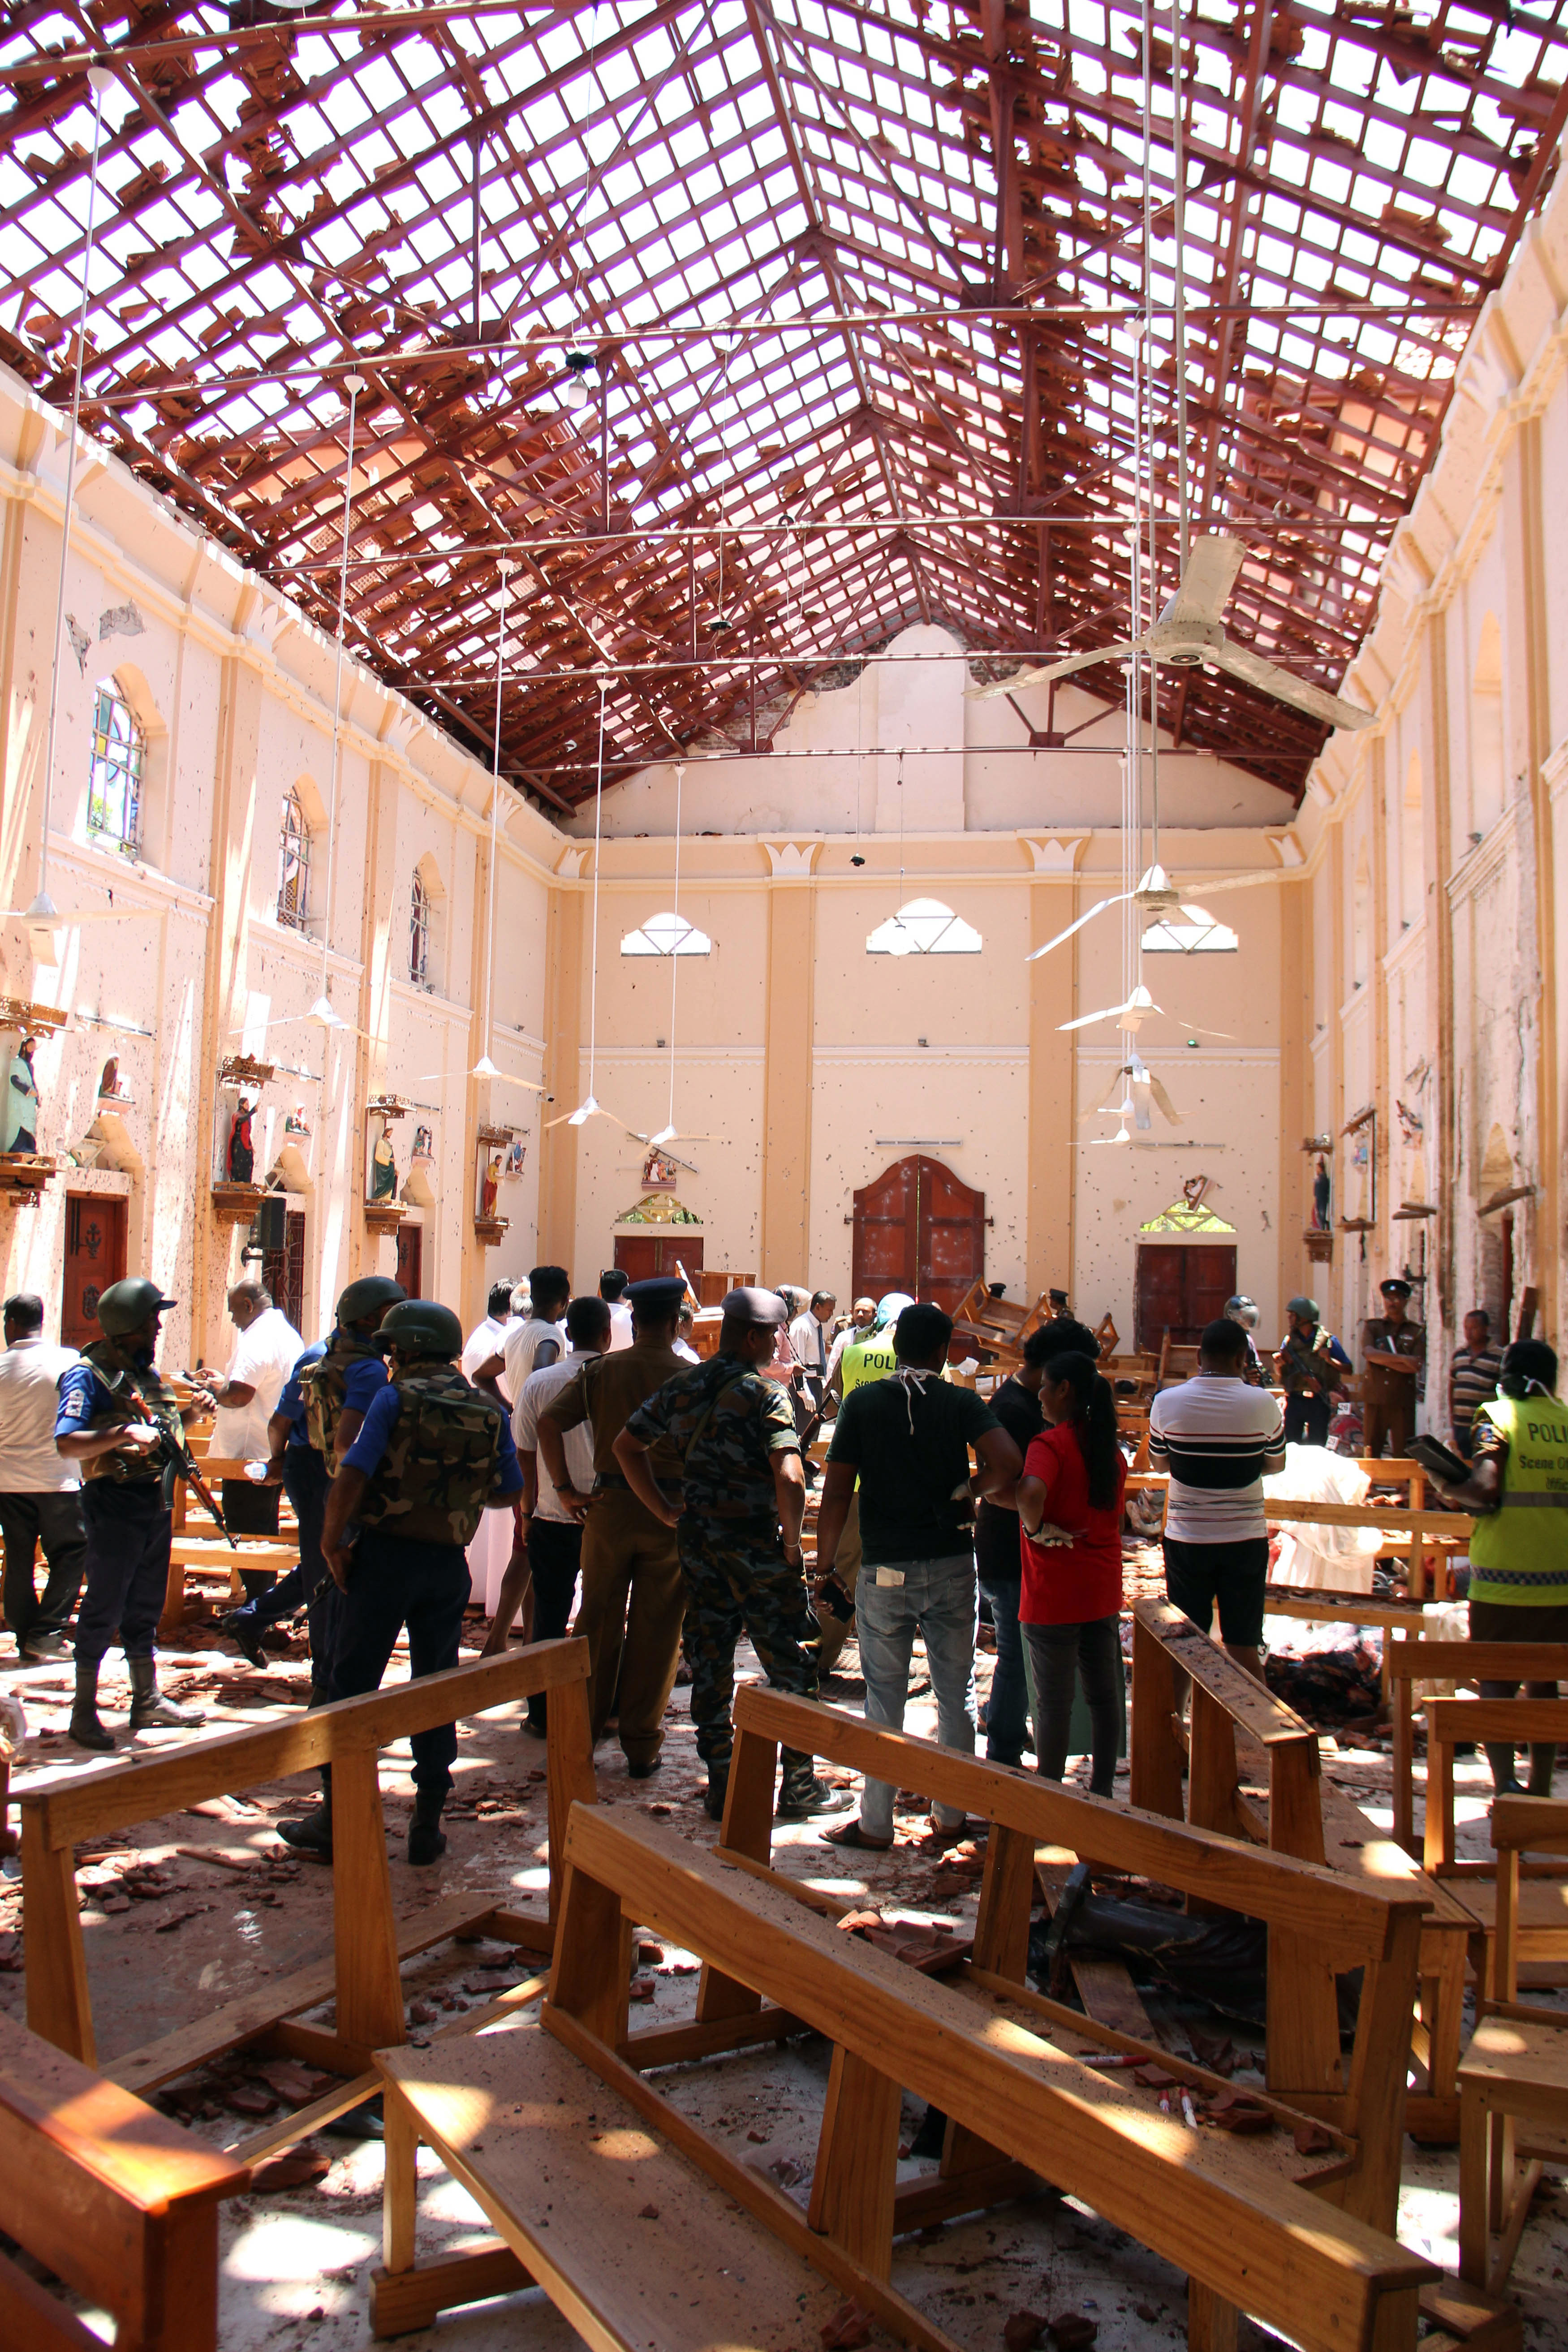 Sri Lankan security personnel walk through debris following an explosion in St Sebastian's Church in Negombo, north of the capital Colombo, on April 21, 2019. - A series of eight devastating bomb blasts ripped through high-end hotels and churches holding Easter services in Sri Lanka on April 21, killing nearly 160 people, including dozens of foreigners. (Photo by STR / AFP) sri lanka bombing